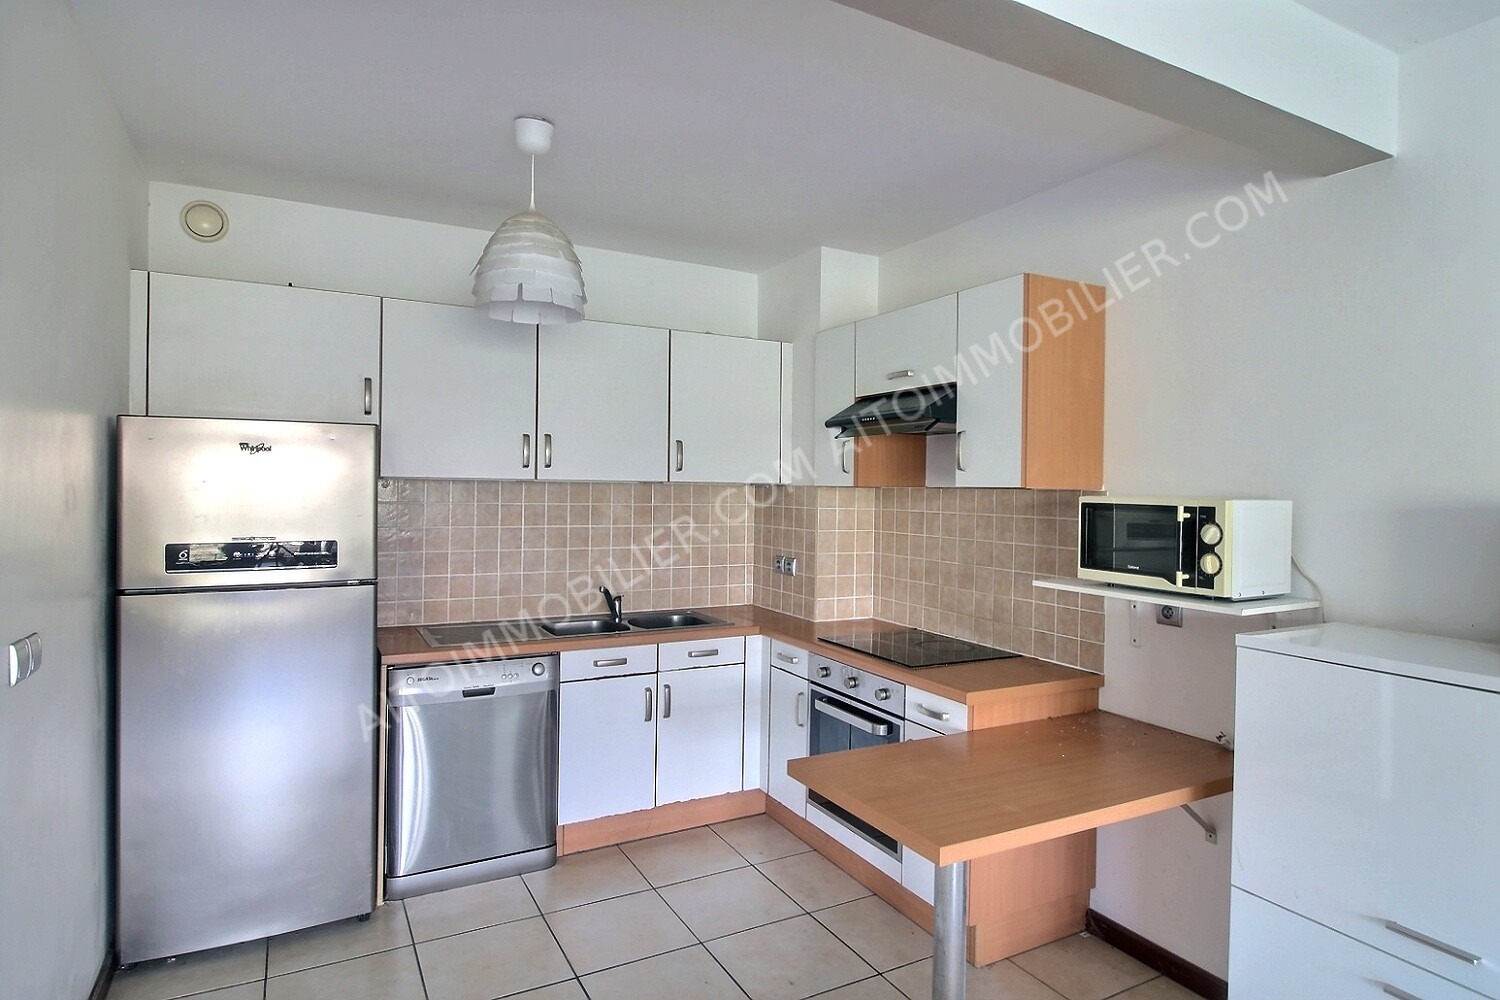 LOCATION FAA'A APPARTEMENT F3 2